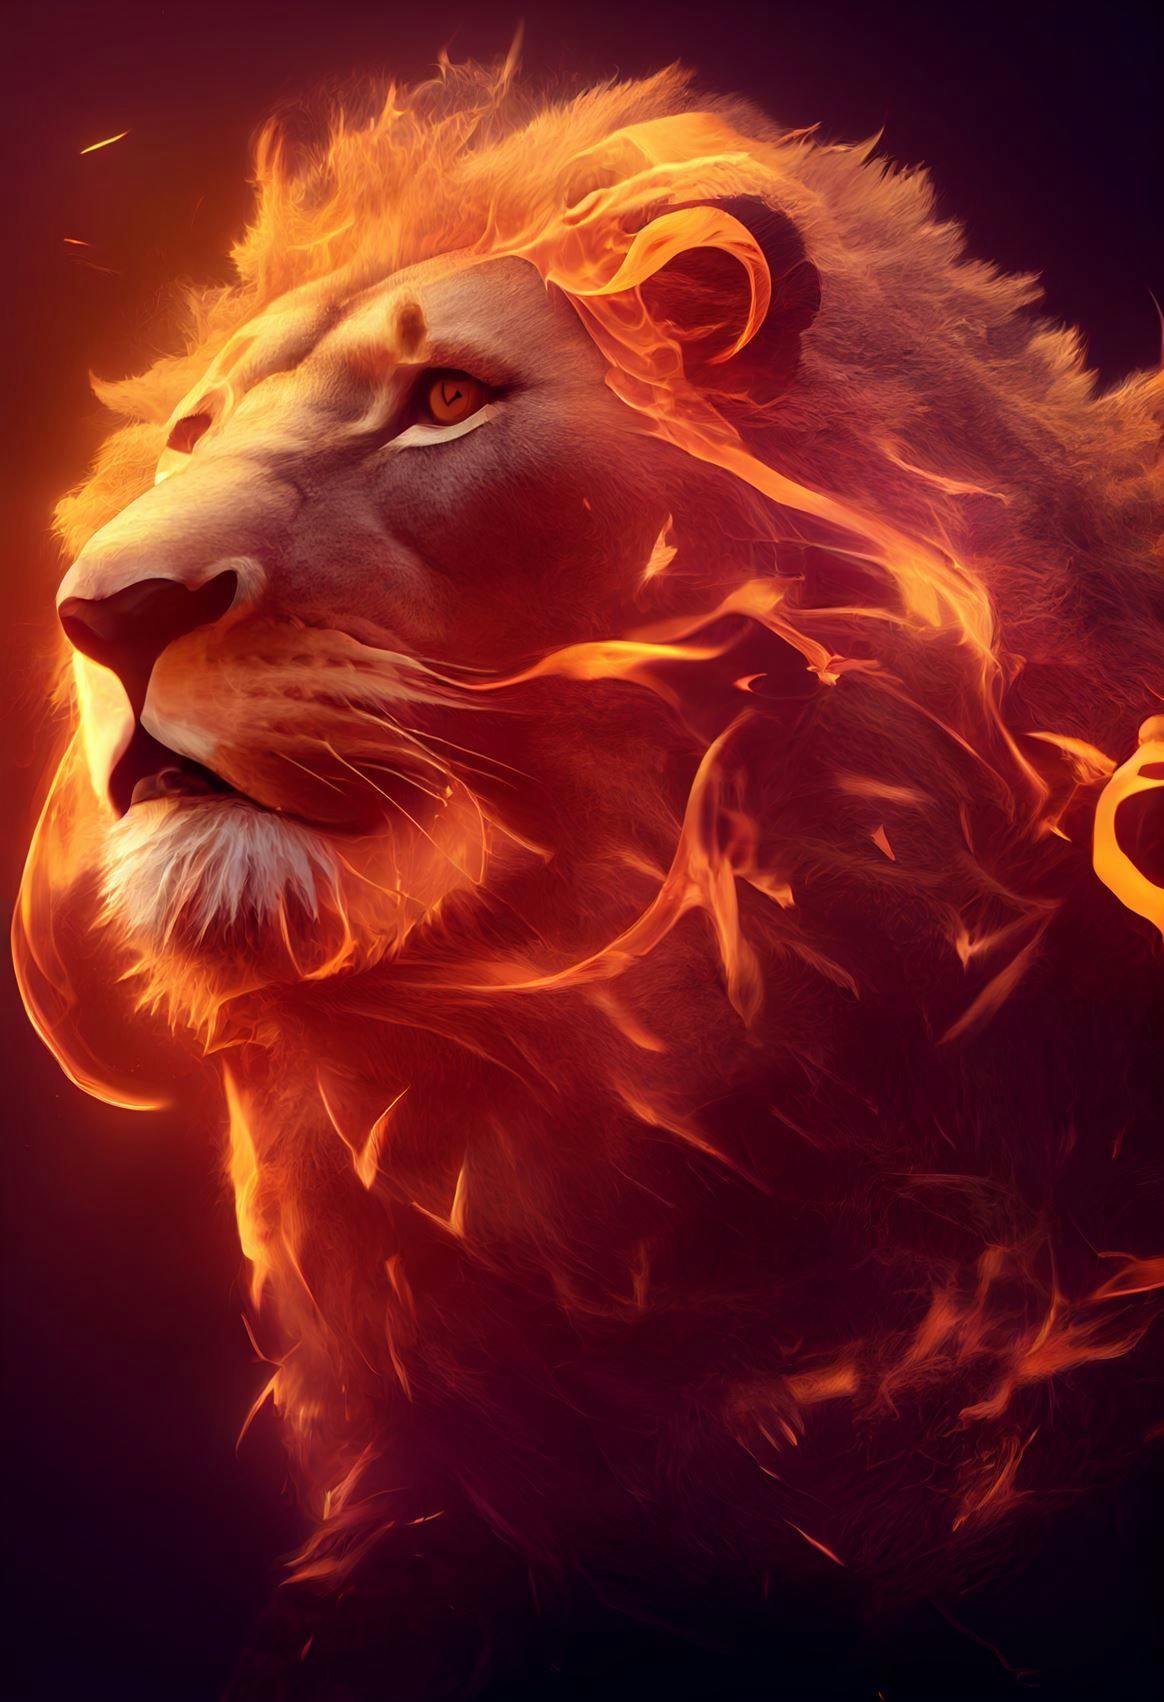 King of the jungle in fire